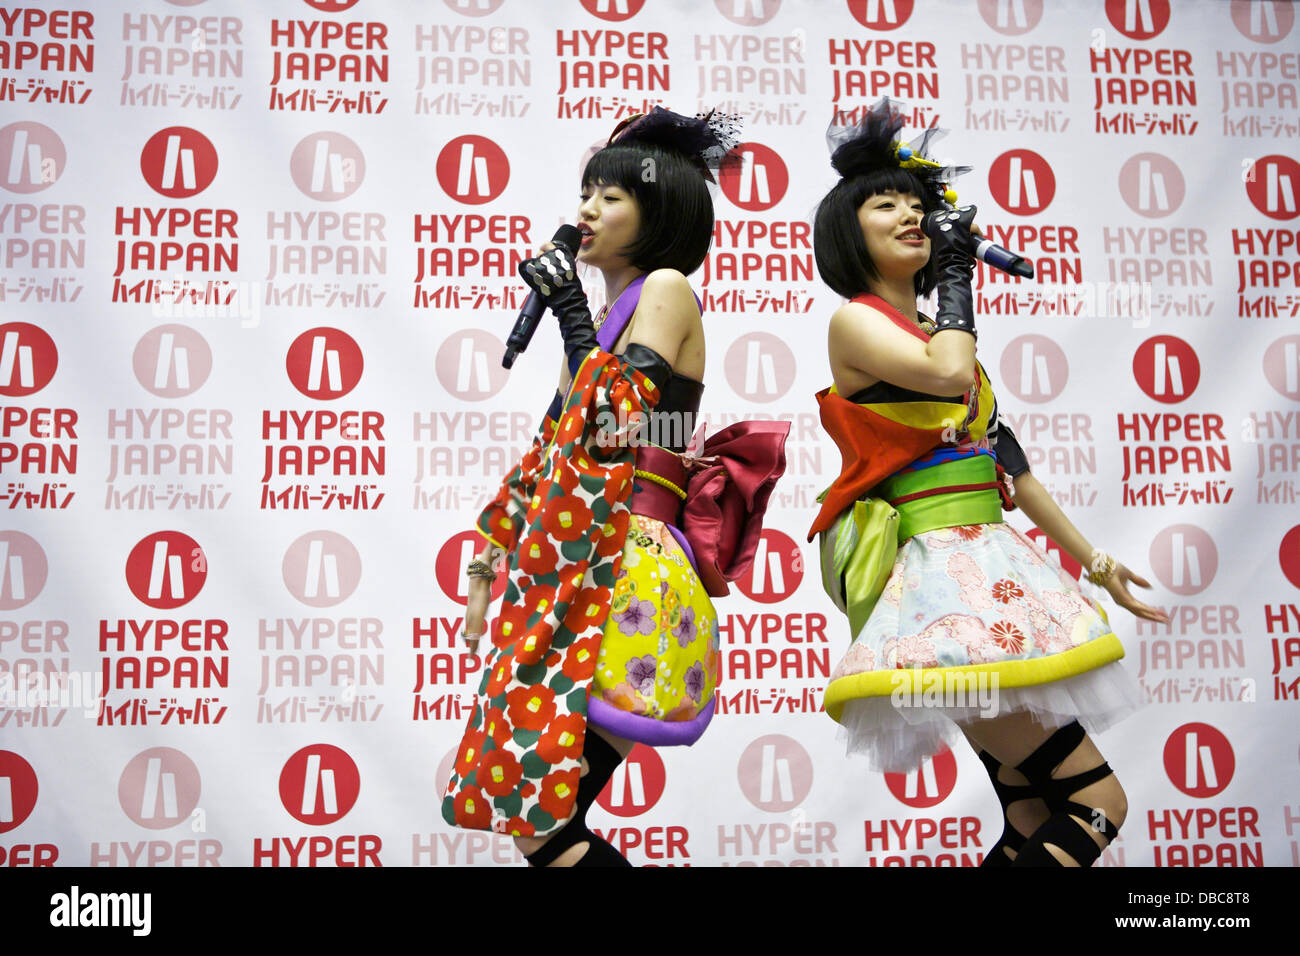 Earls Court, London UK. 27th July, 2013. Yanakiku, who represent Japanese pop culture, perform live on stage at Hyper Japan. Credit:  Tony Farrugia/Alamy Live News Stock Photo